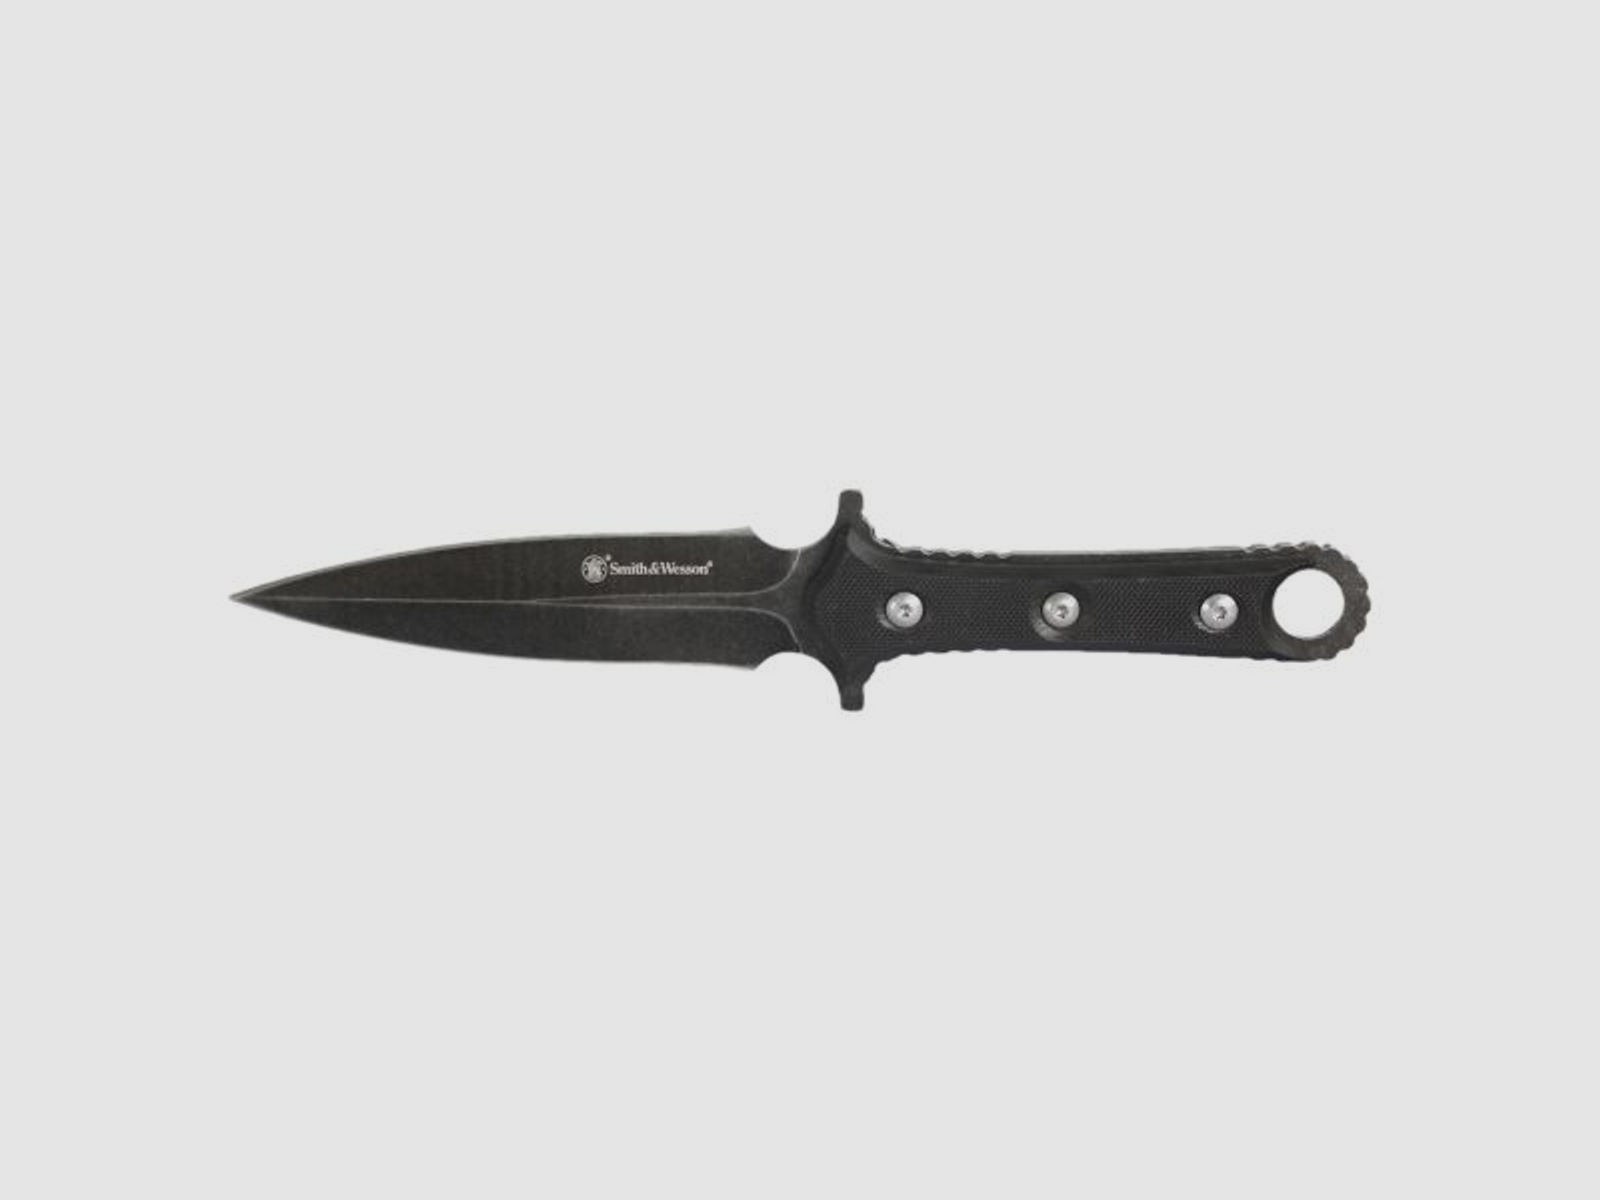 Smith & Wesson Smith &amp; Wesson Stiefeldolch stonewashed-finish